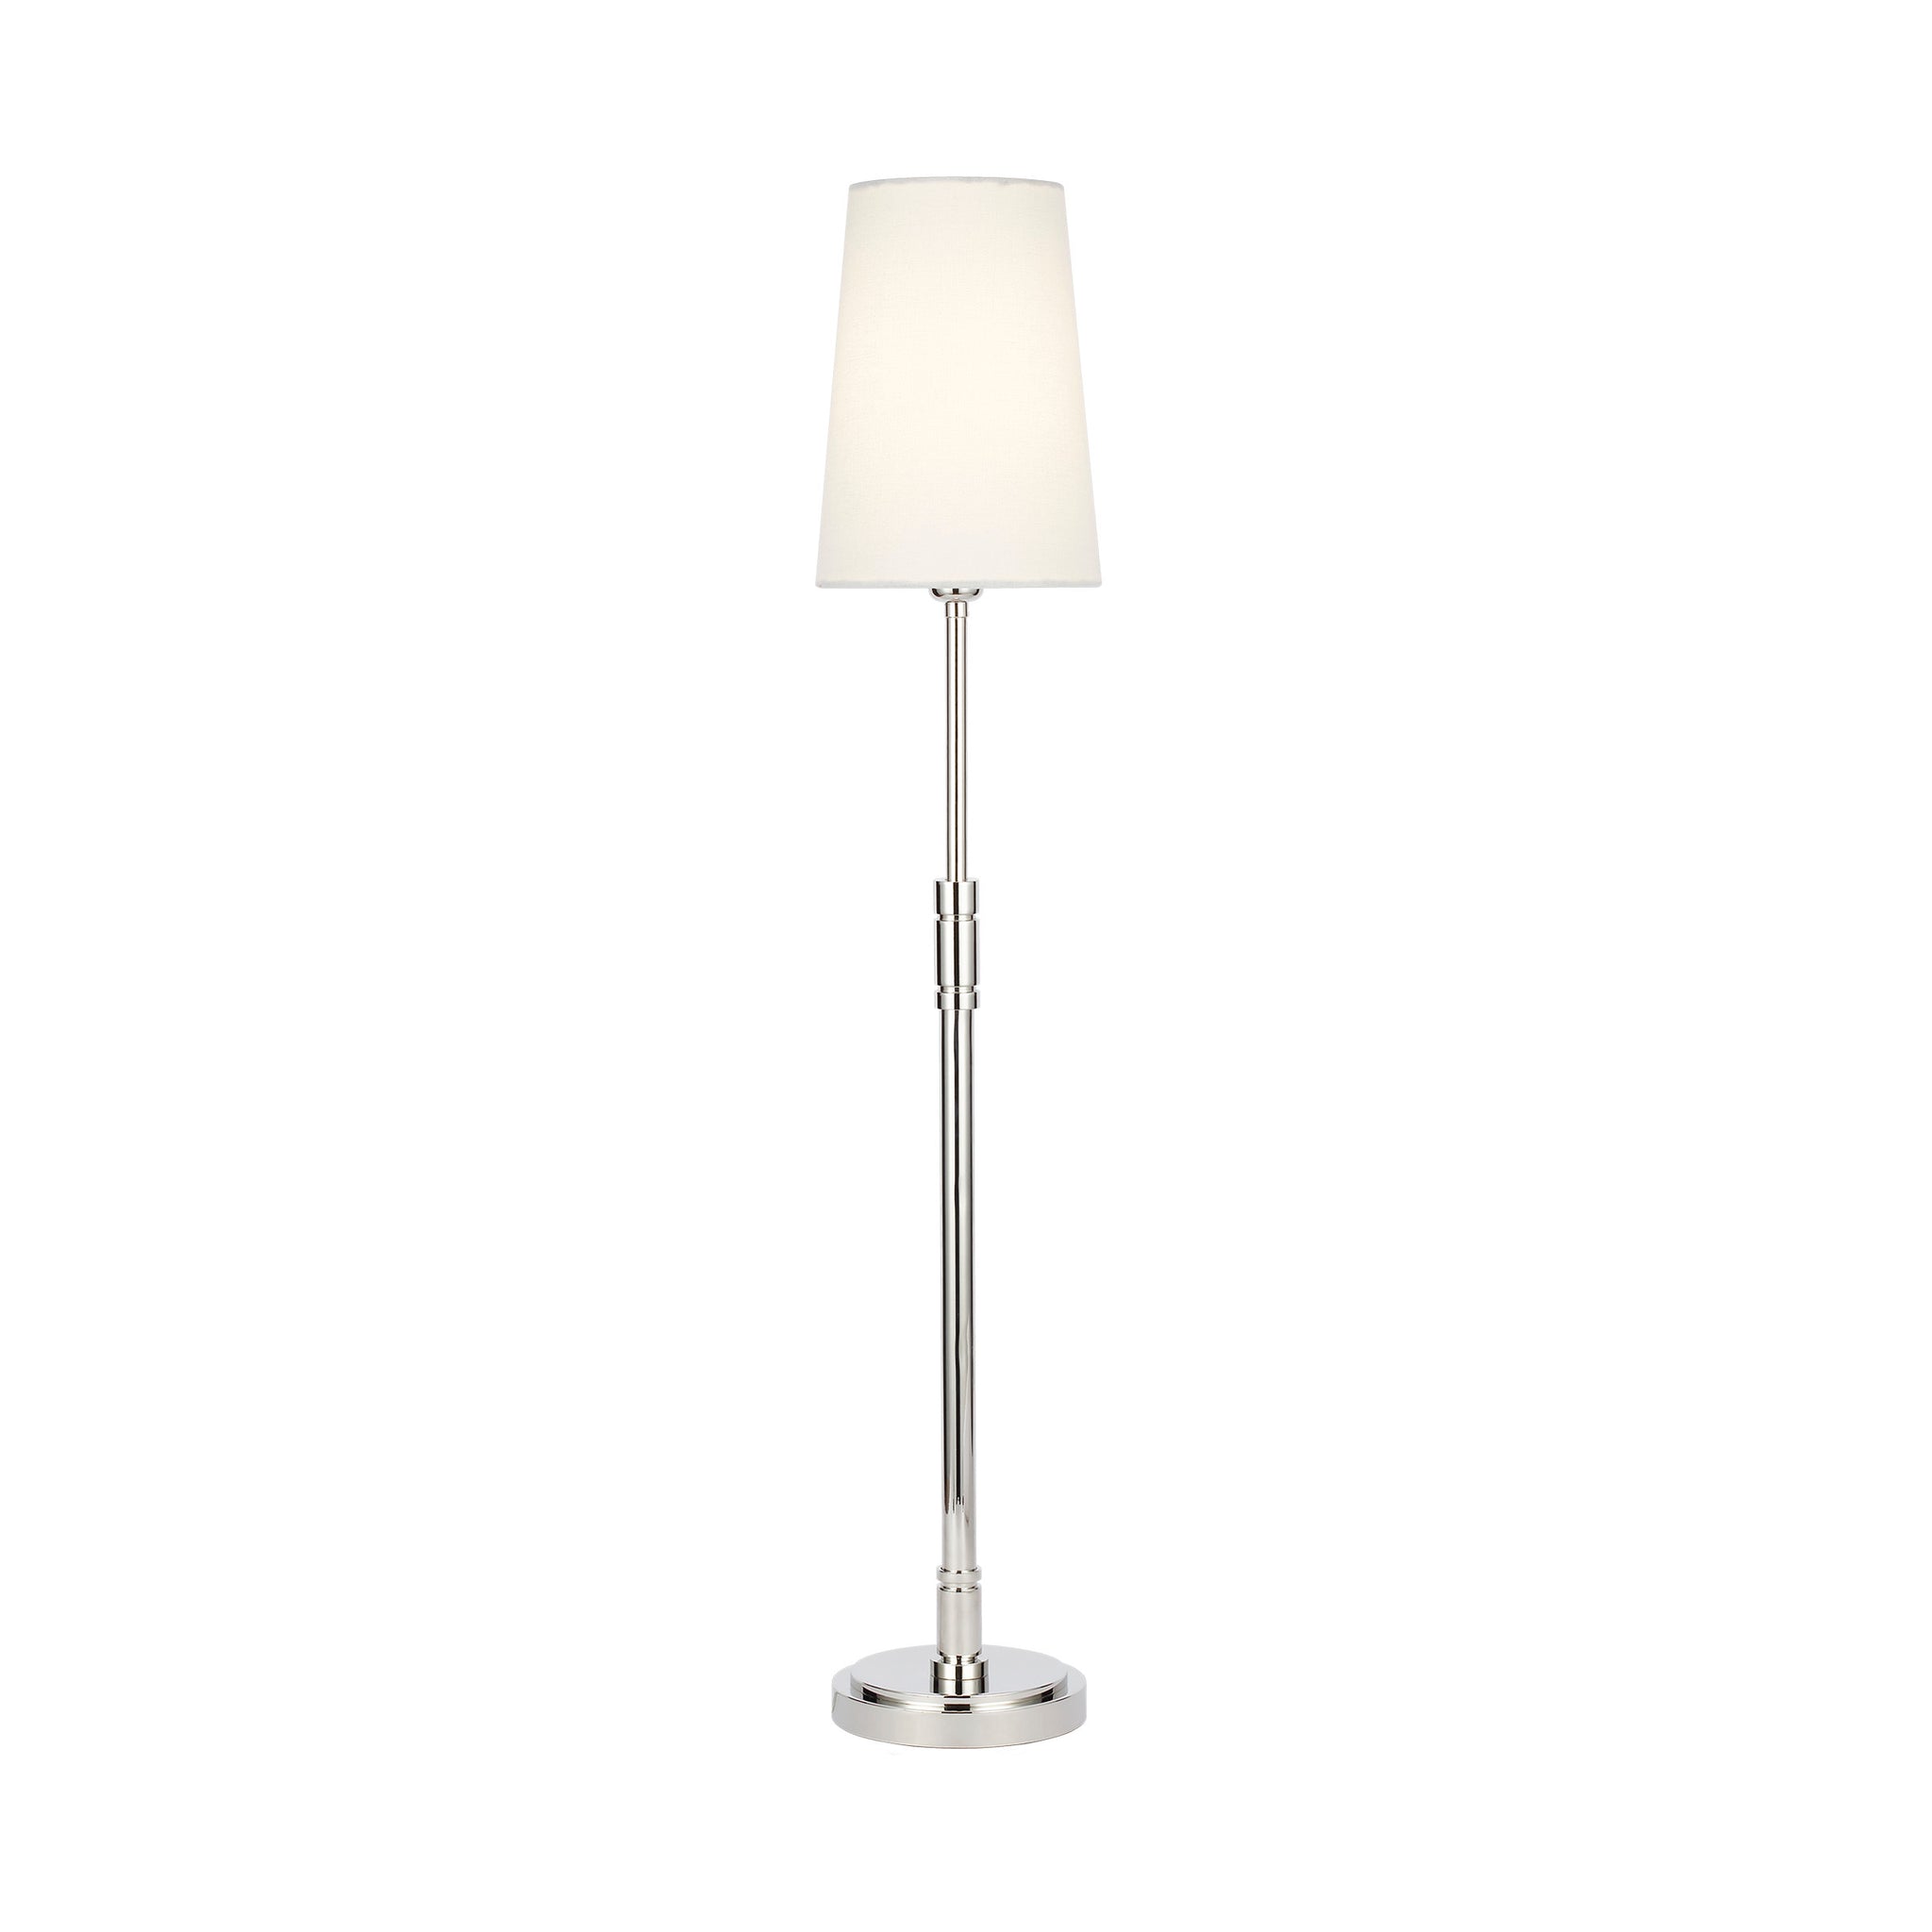 Beckham Classic Table Lamp Polished Nickel